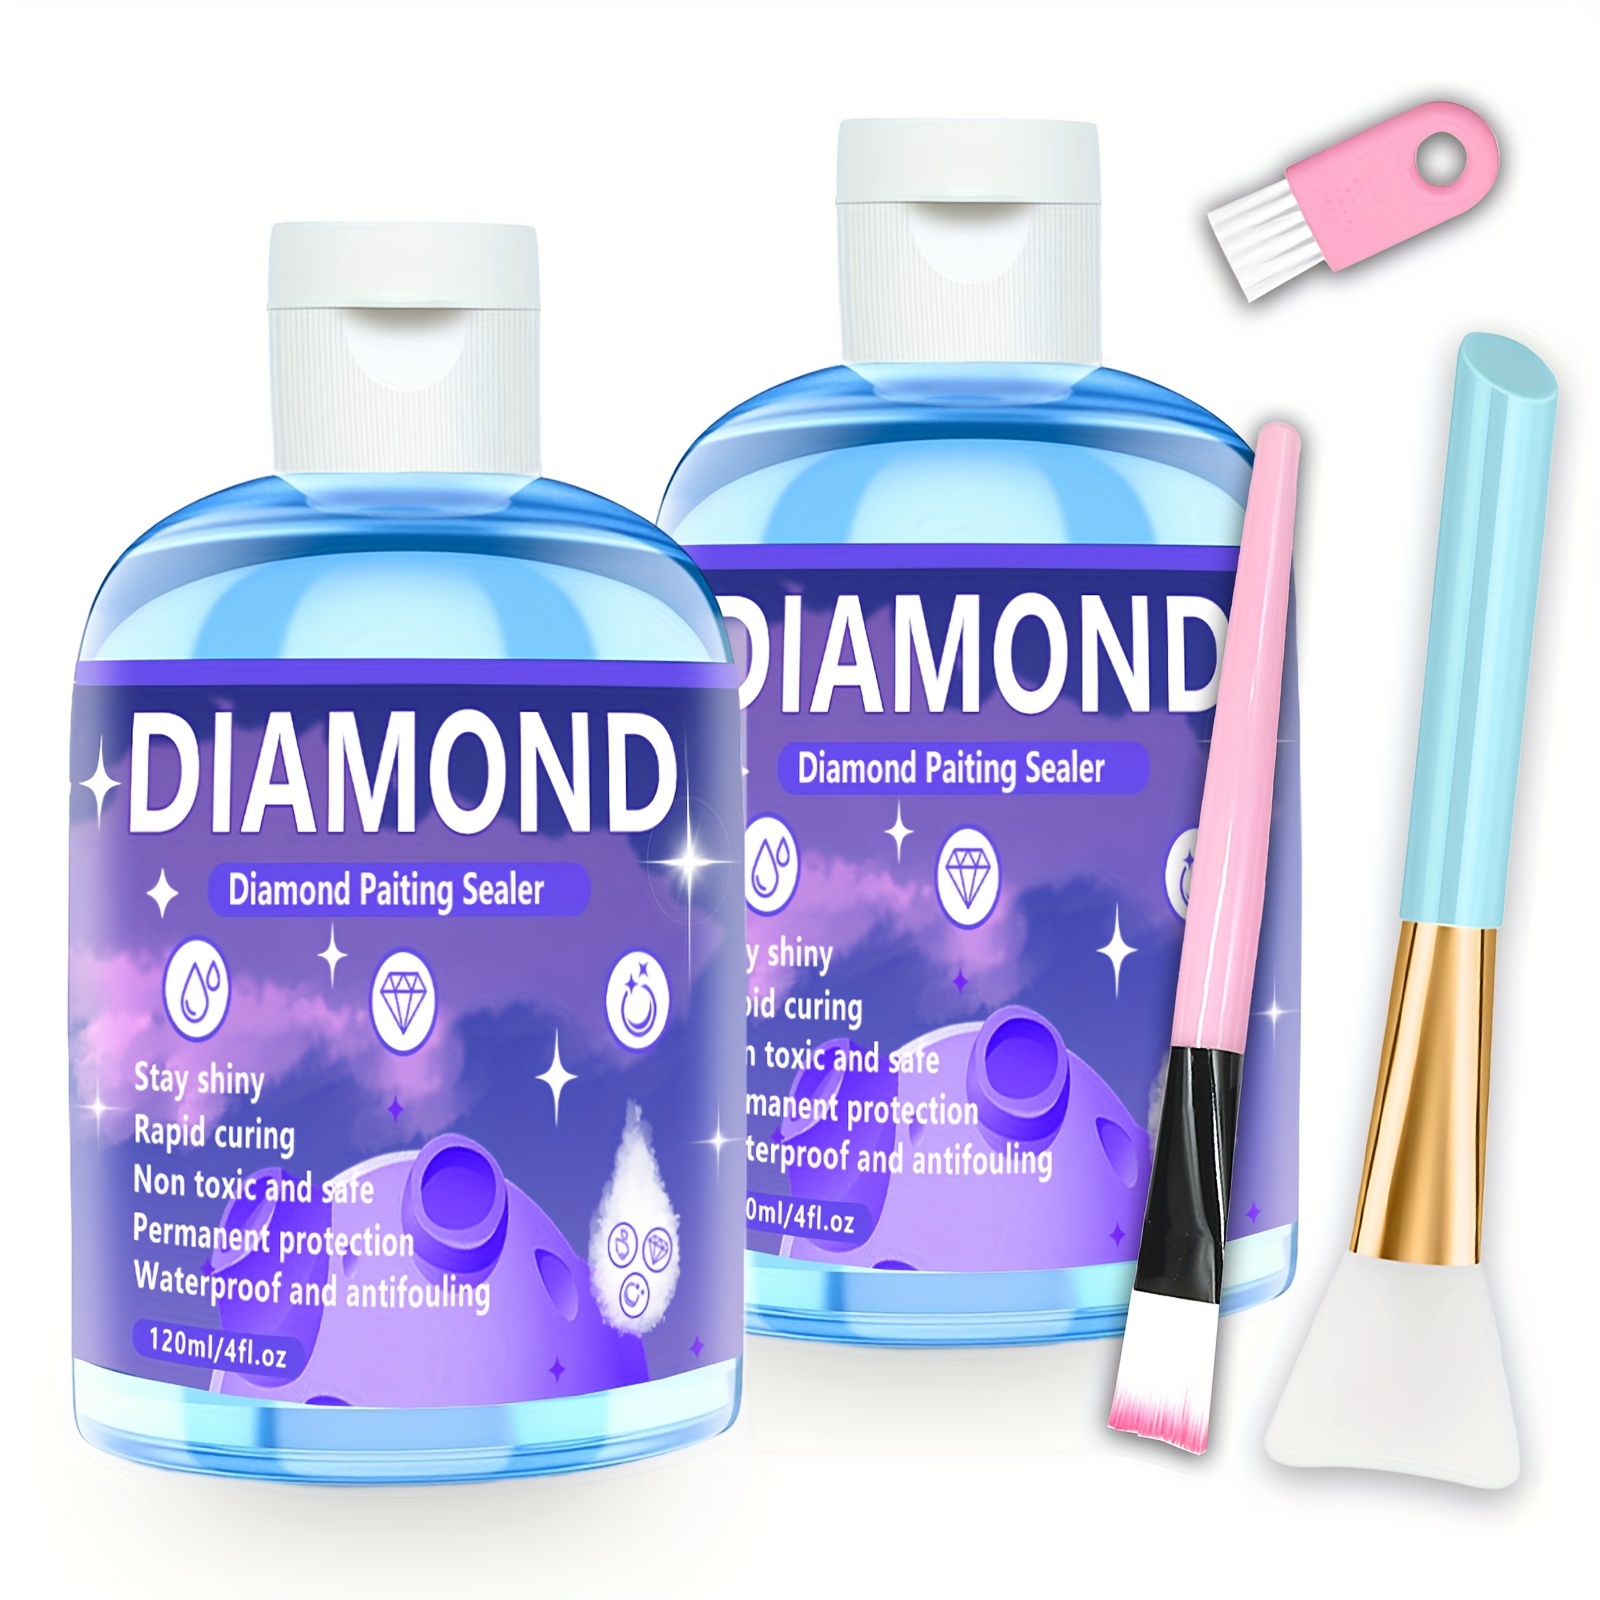 

Diamond Art Sealer With High Gloss Finish - Includes Resin Pen & Accessories, Permanent Shine Effect For Diamond Painting And Puzzles